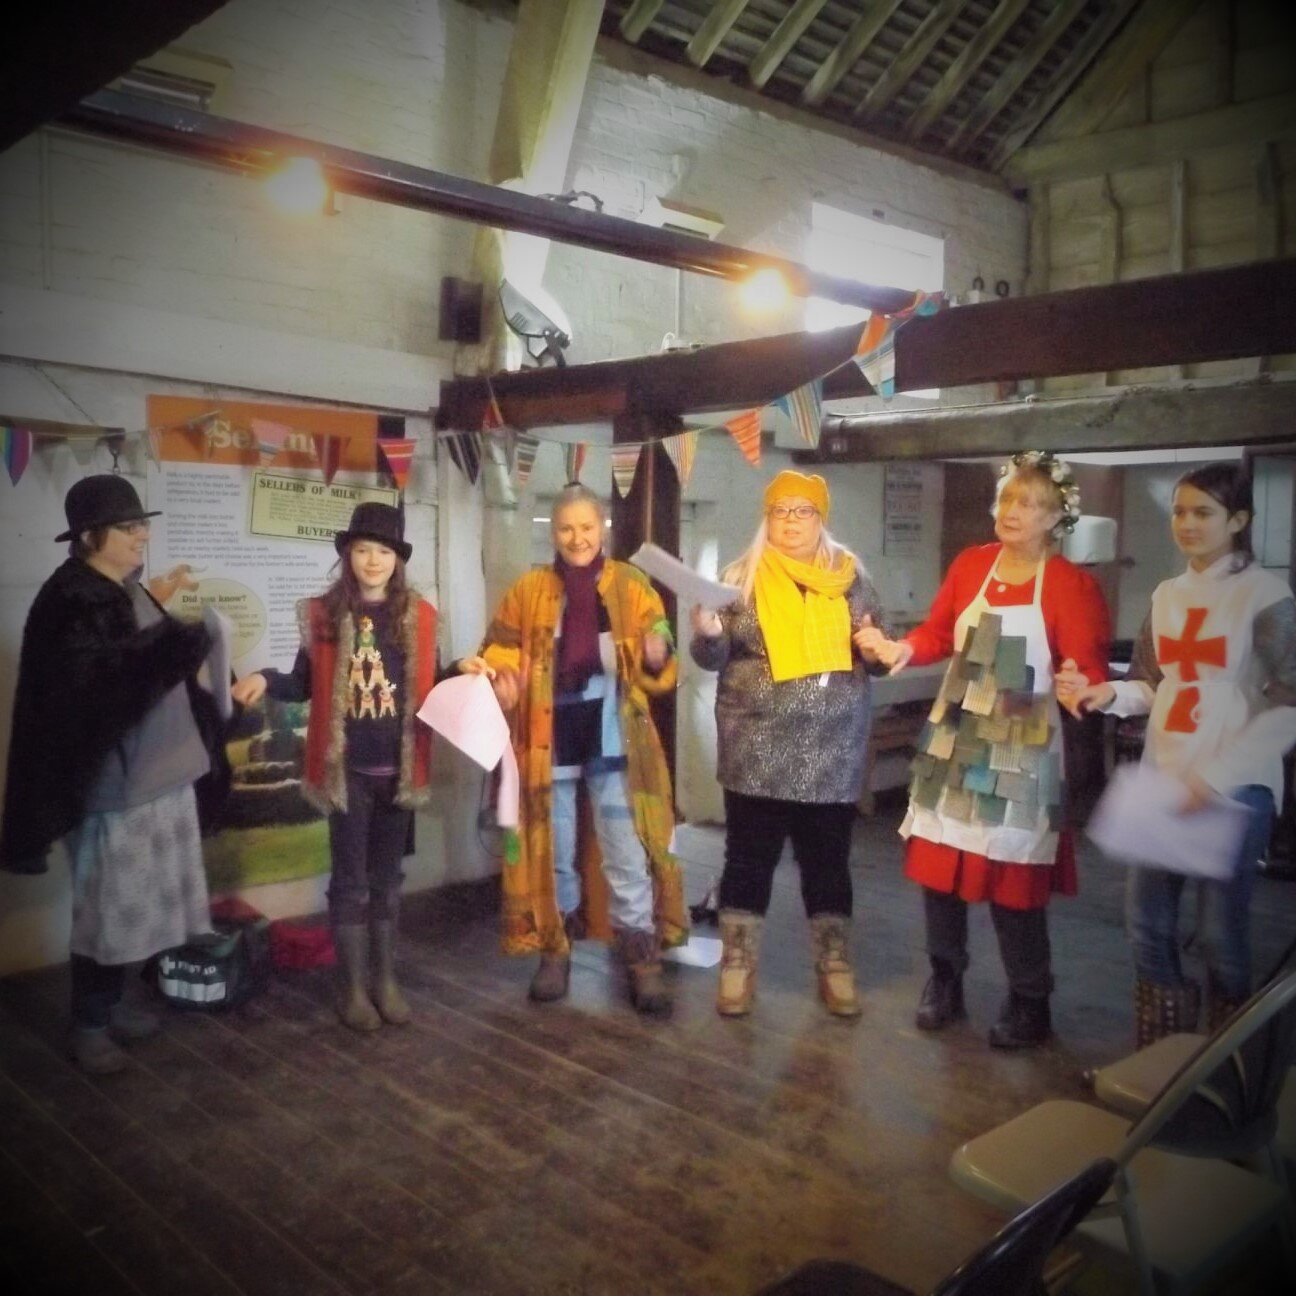 Members of FOLK performing a local mummers play 